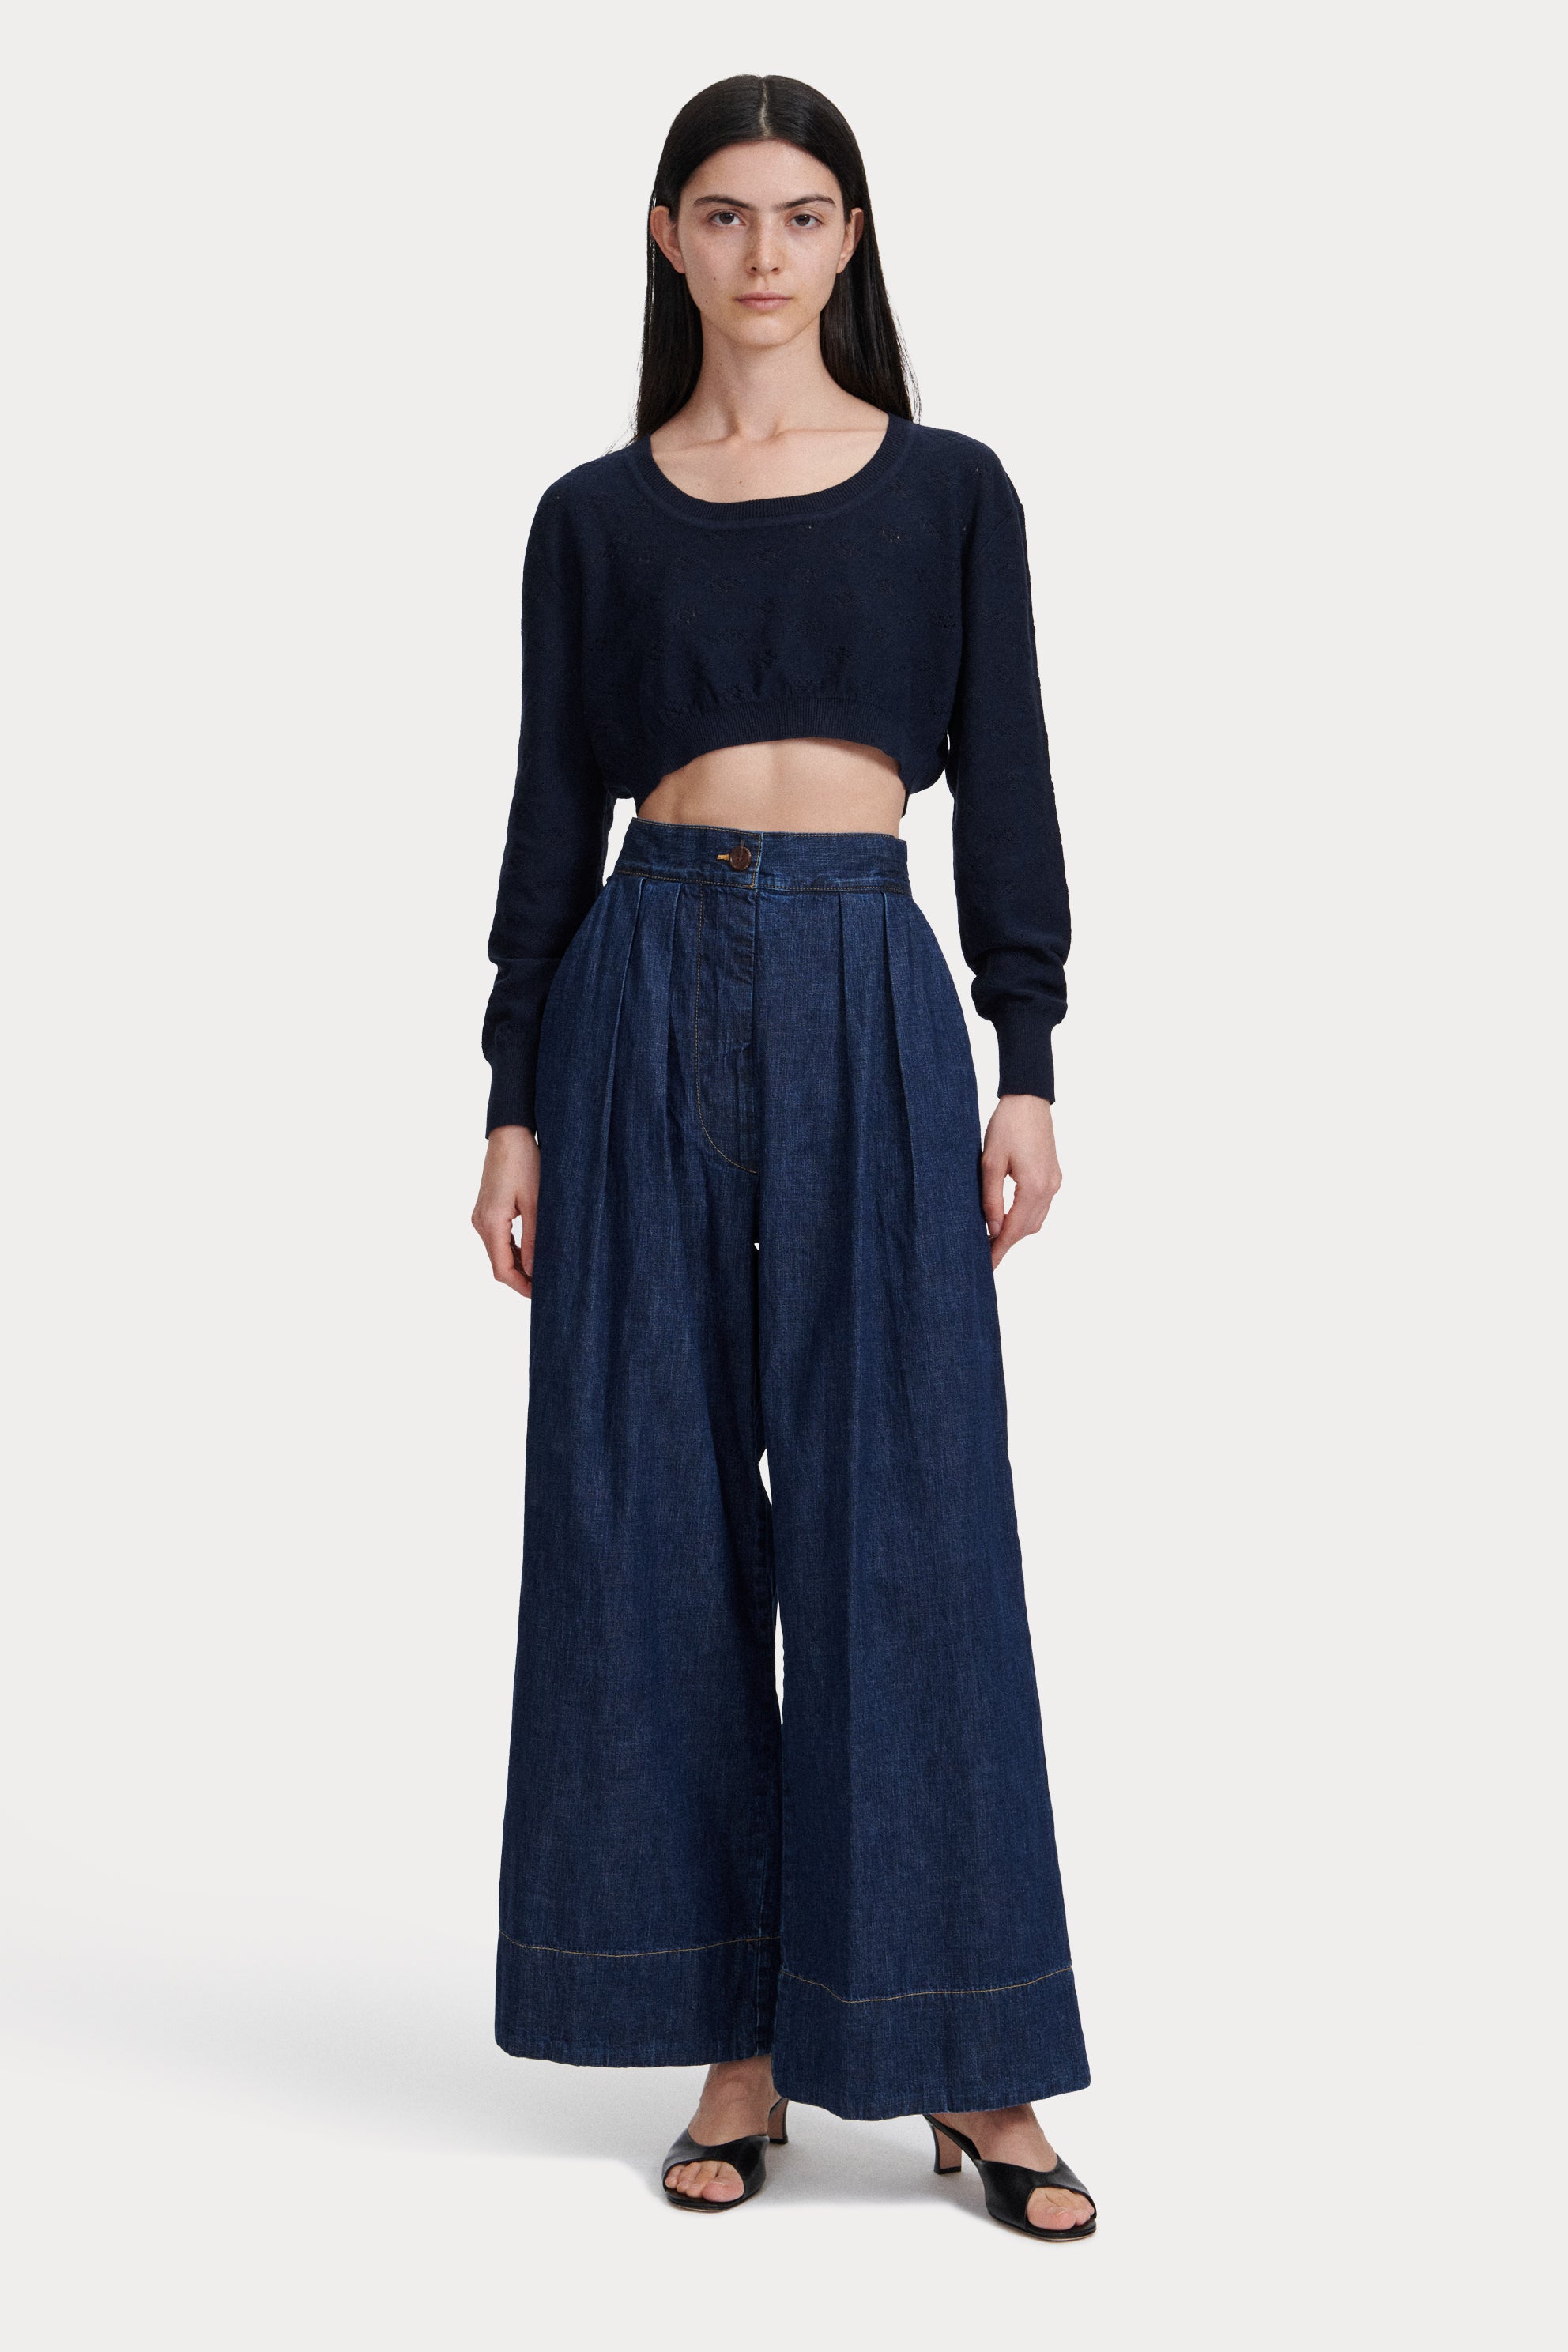 Knits and Sweaters | Rachel Comey